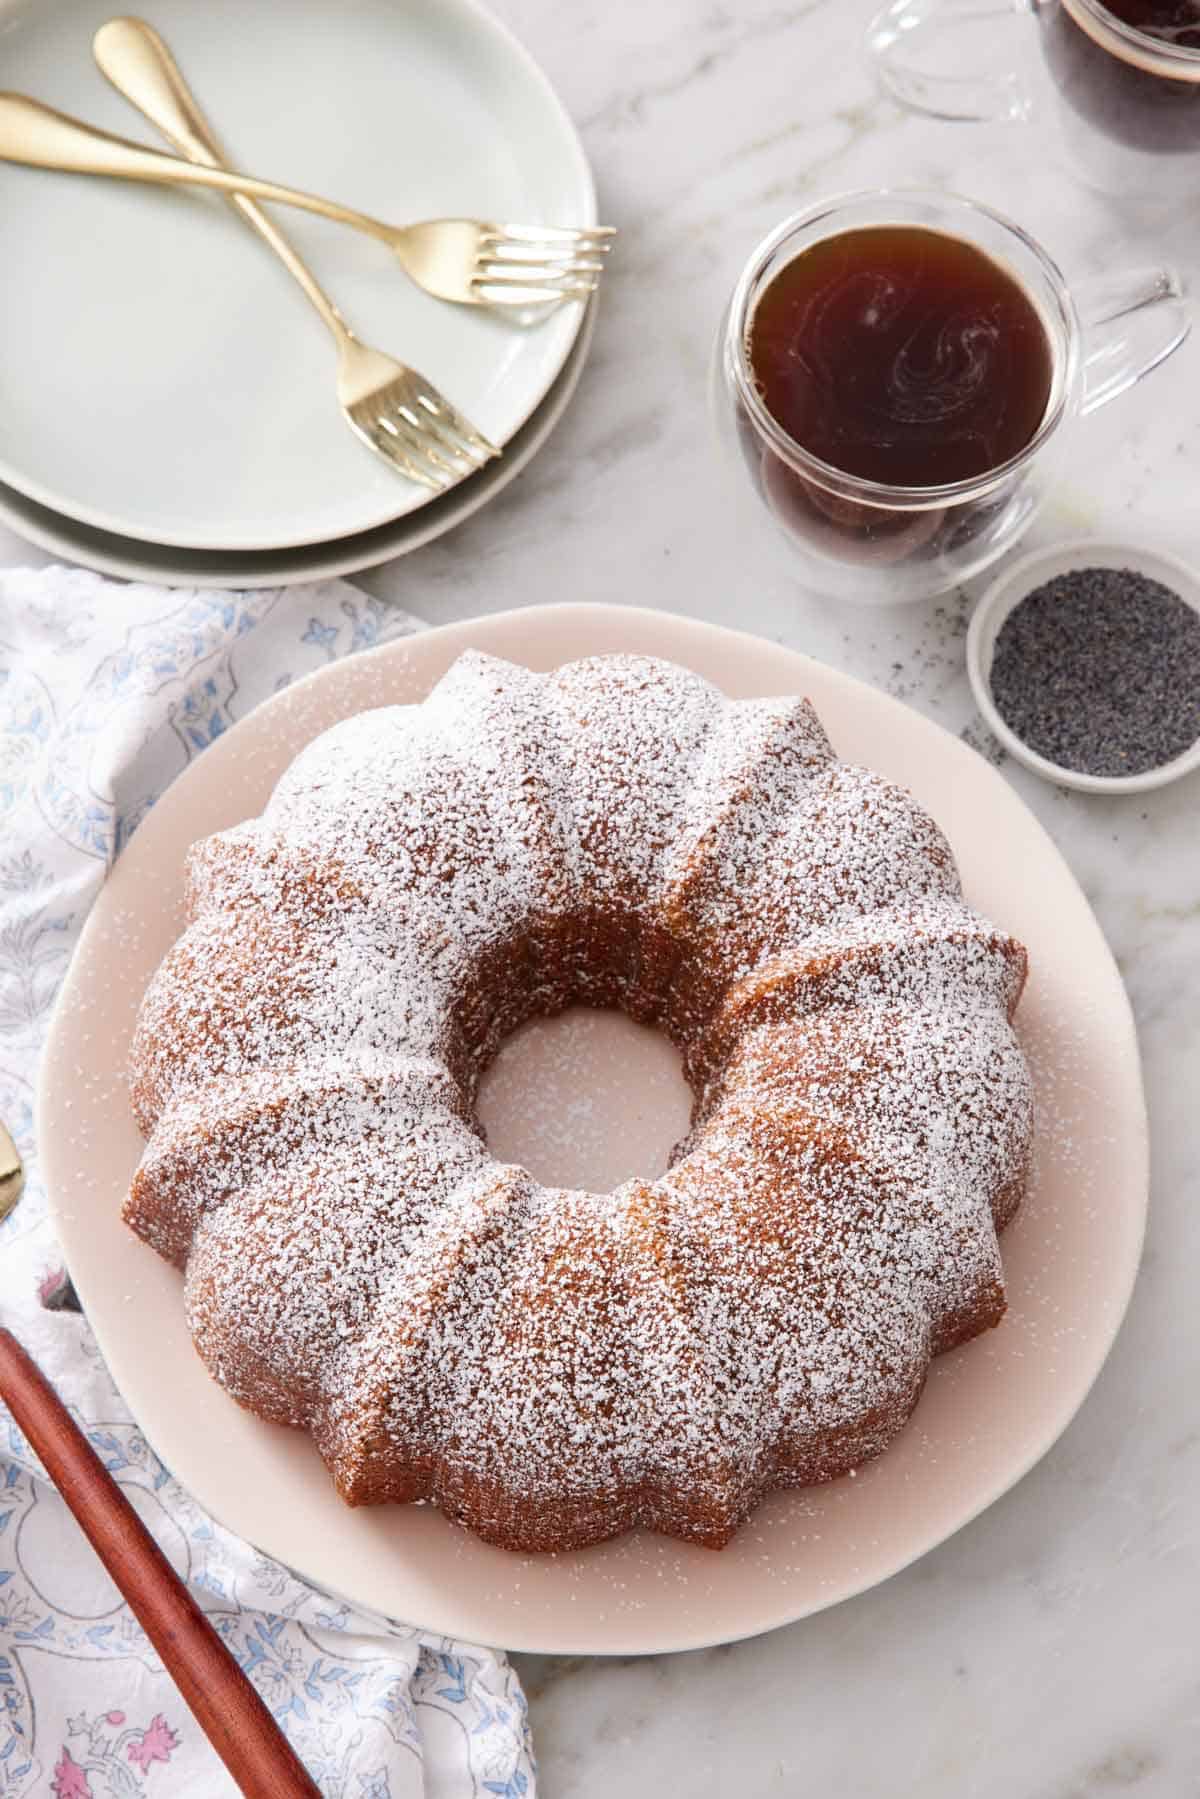 Overhead view of a poppy seed cake on a platter dusted with powdered sugar. Coffee and poppy seed in the back with some plates and forks.